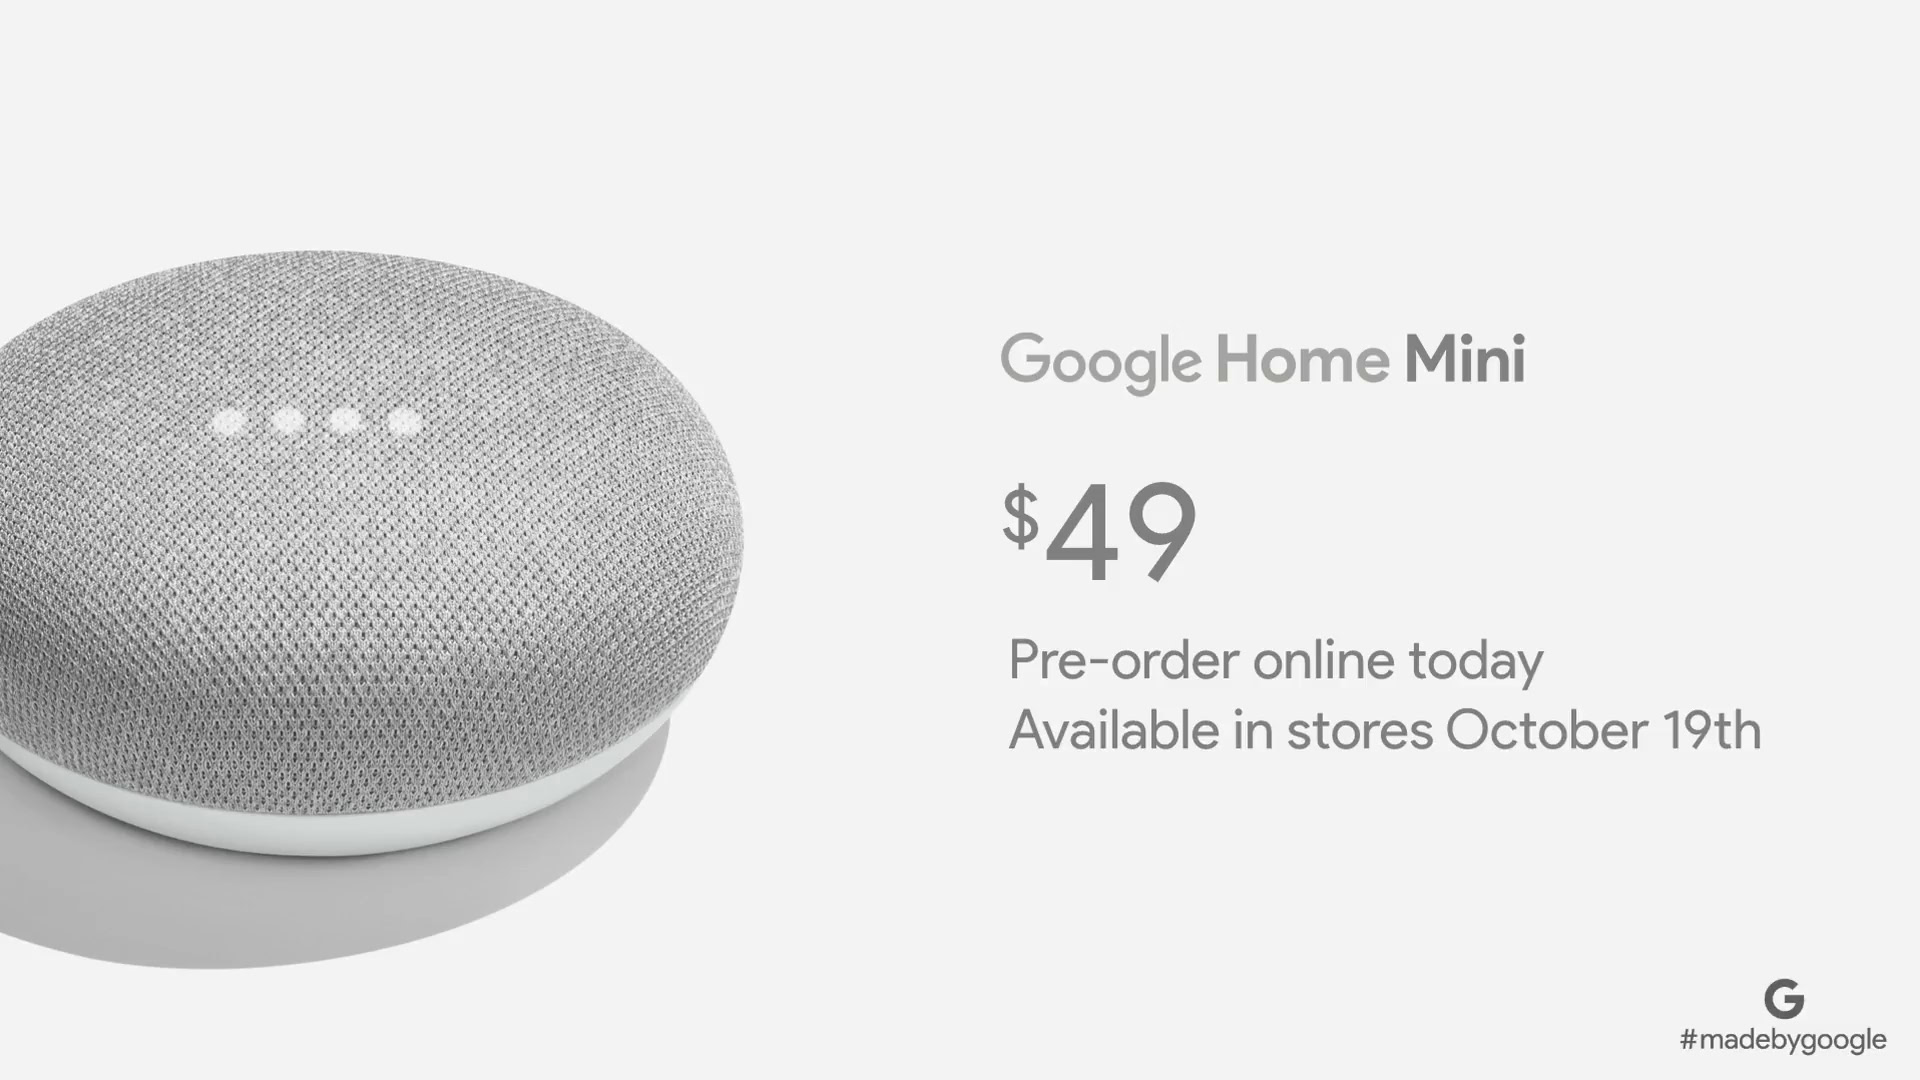 Google Home Mini officially announced: everything you need to know